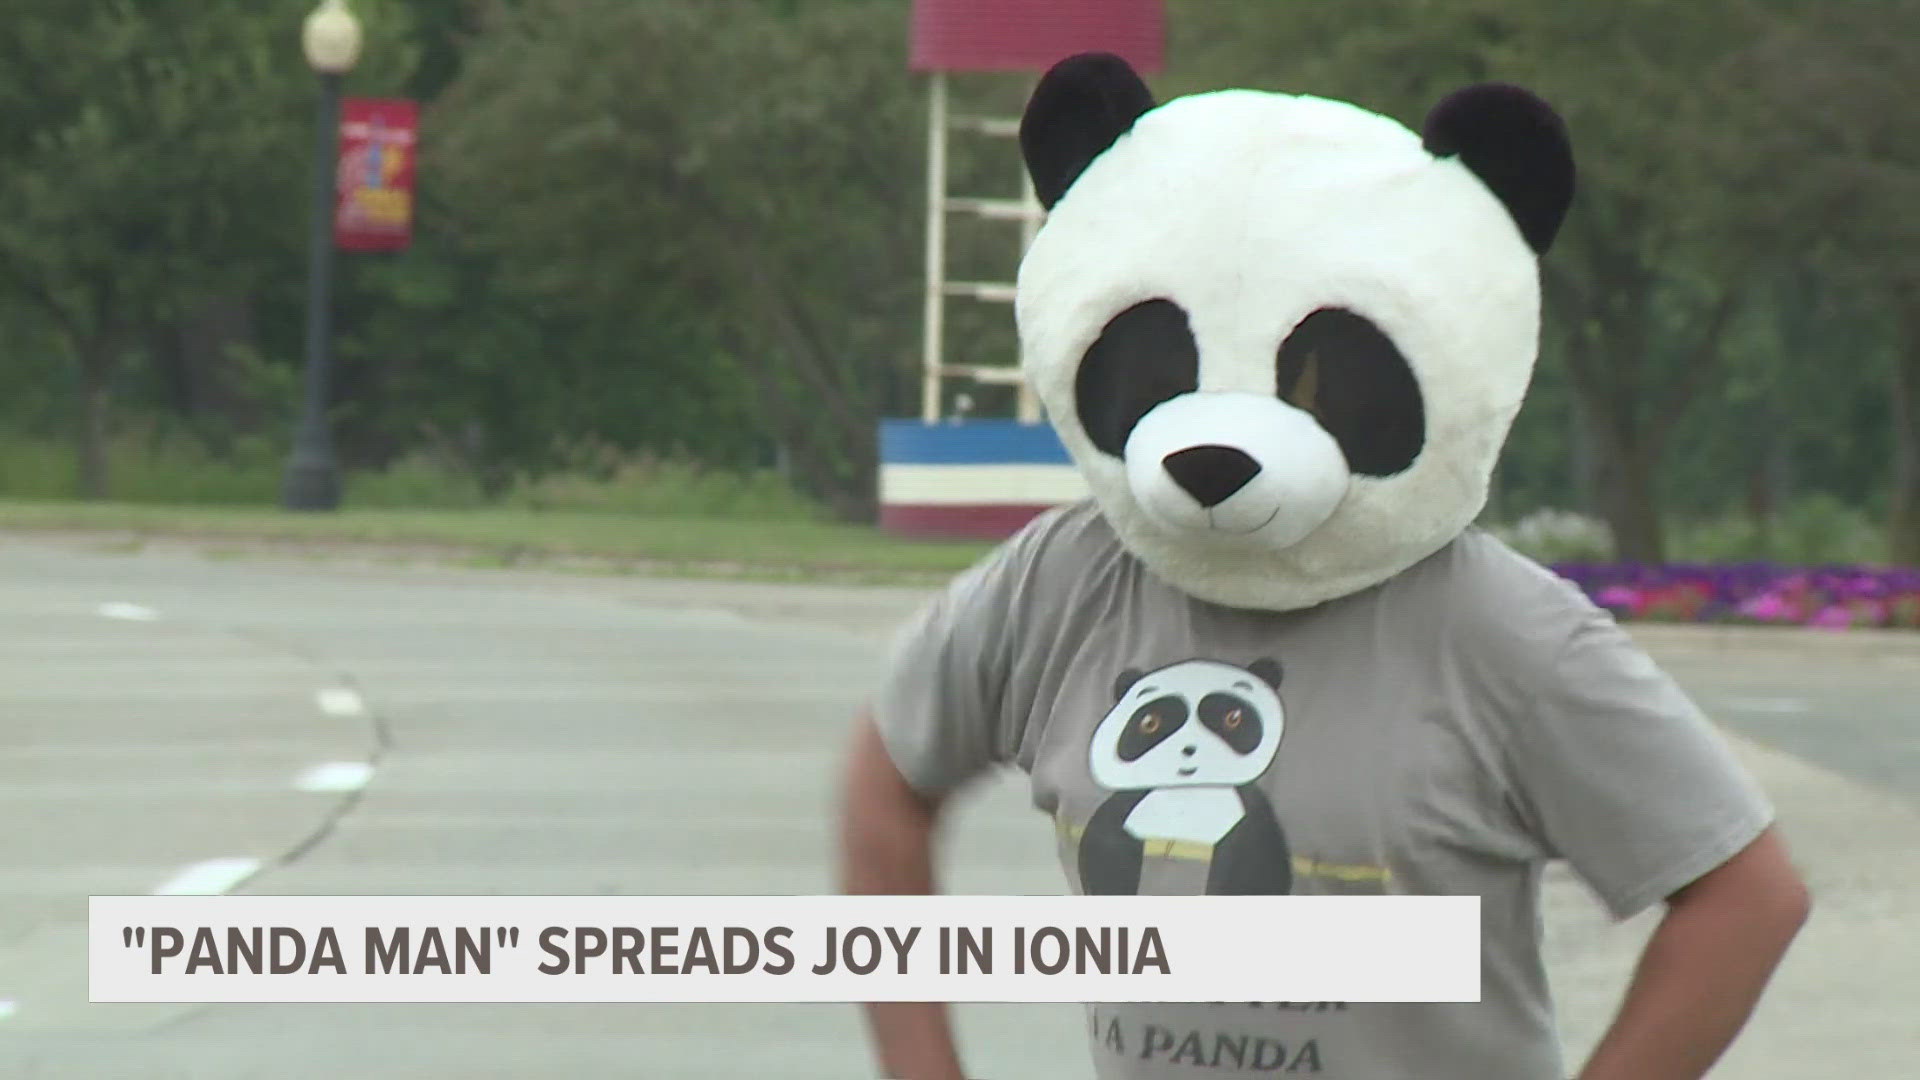 A couple of times a week he walks the streets wearing a panda head, waving and spreading cheer.